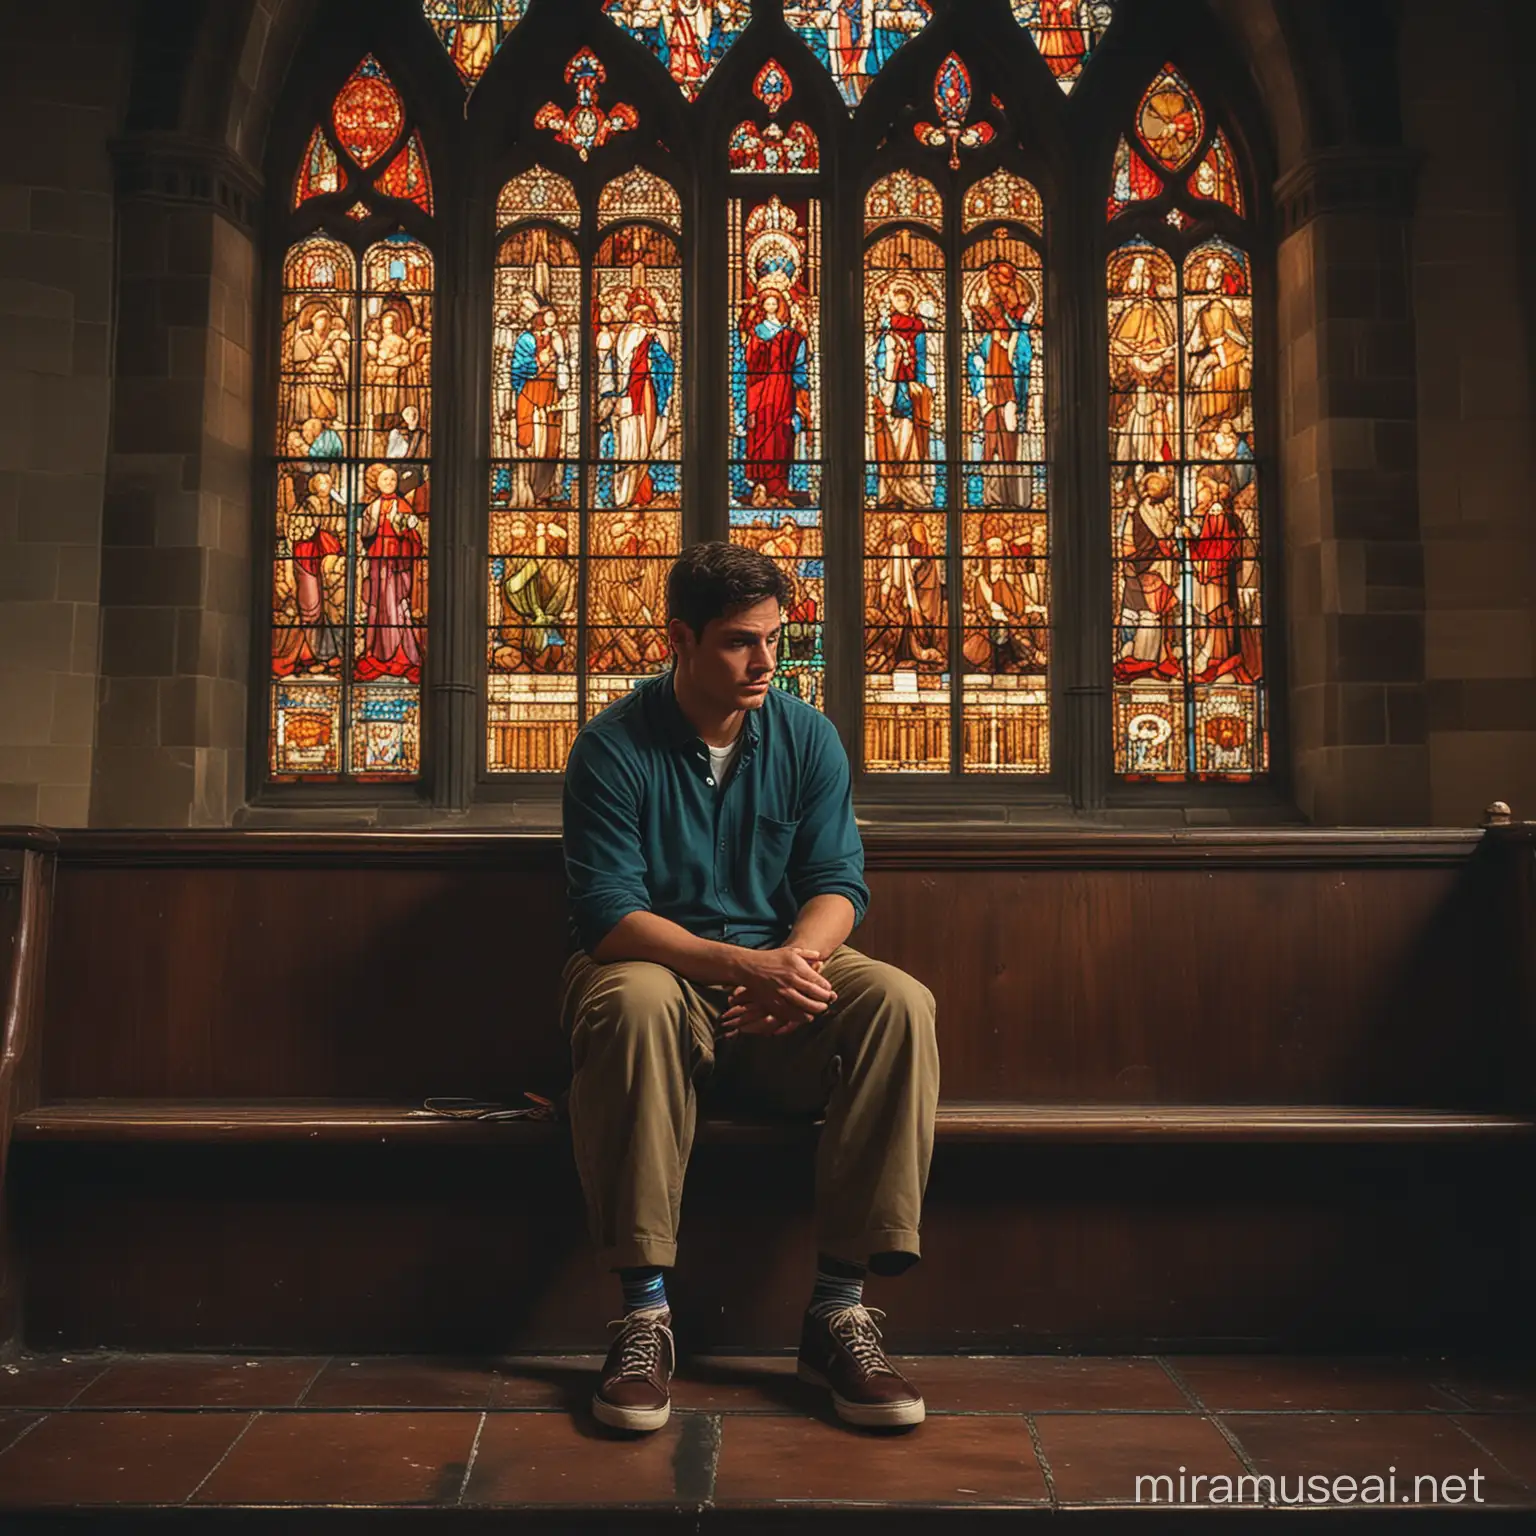 Create a visually striking artwork depicting a dark, somber scene of a solitary figure: a tall, broad, and stocky man seated in a dimly lit church library with stained glass windows casting colorful patterns across the room. The man should have black hair, broad shoulders, and an overweight stature with a round belly. He is casually dressed in cargo shorts, a collared t-shirt, sneakers, and socks. His expression is stern and brooding, with small eyes, a large nose, and big ears. His hazel eyes pierce through the darkness, conveying a fierce connection to the audience. The man's face is rounded with a double chin, sporting a traditional haircut with a side part. The overall color palette should be dark, with shades of brown and maroon dominating the scene, illuminated by the vibrant hues of the stained glass windows. The man is depicted alone, absorbed in his thoughts, and staring intensely into the distance, adding depth and emotion to the composition.